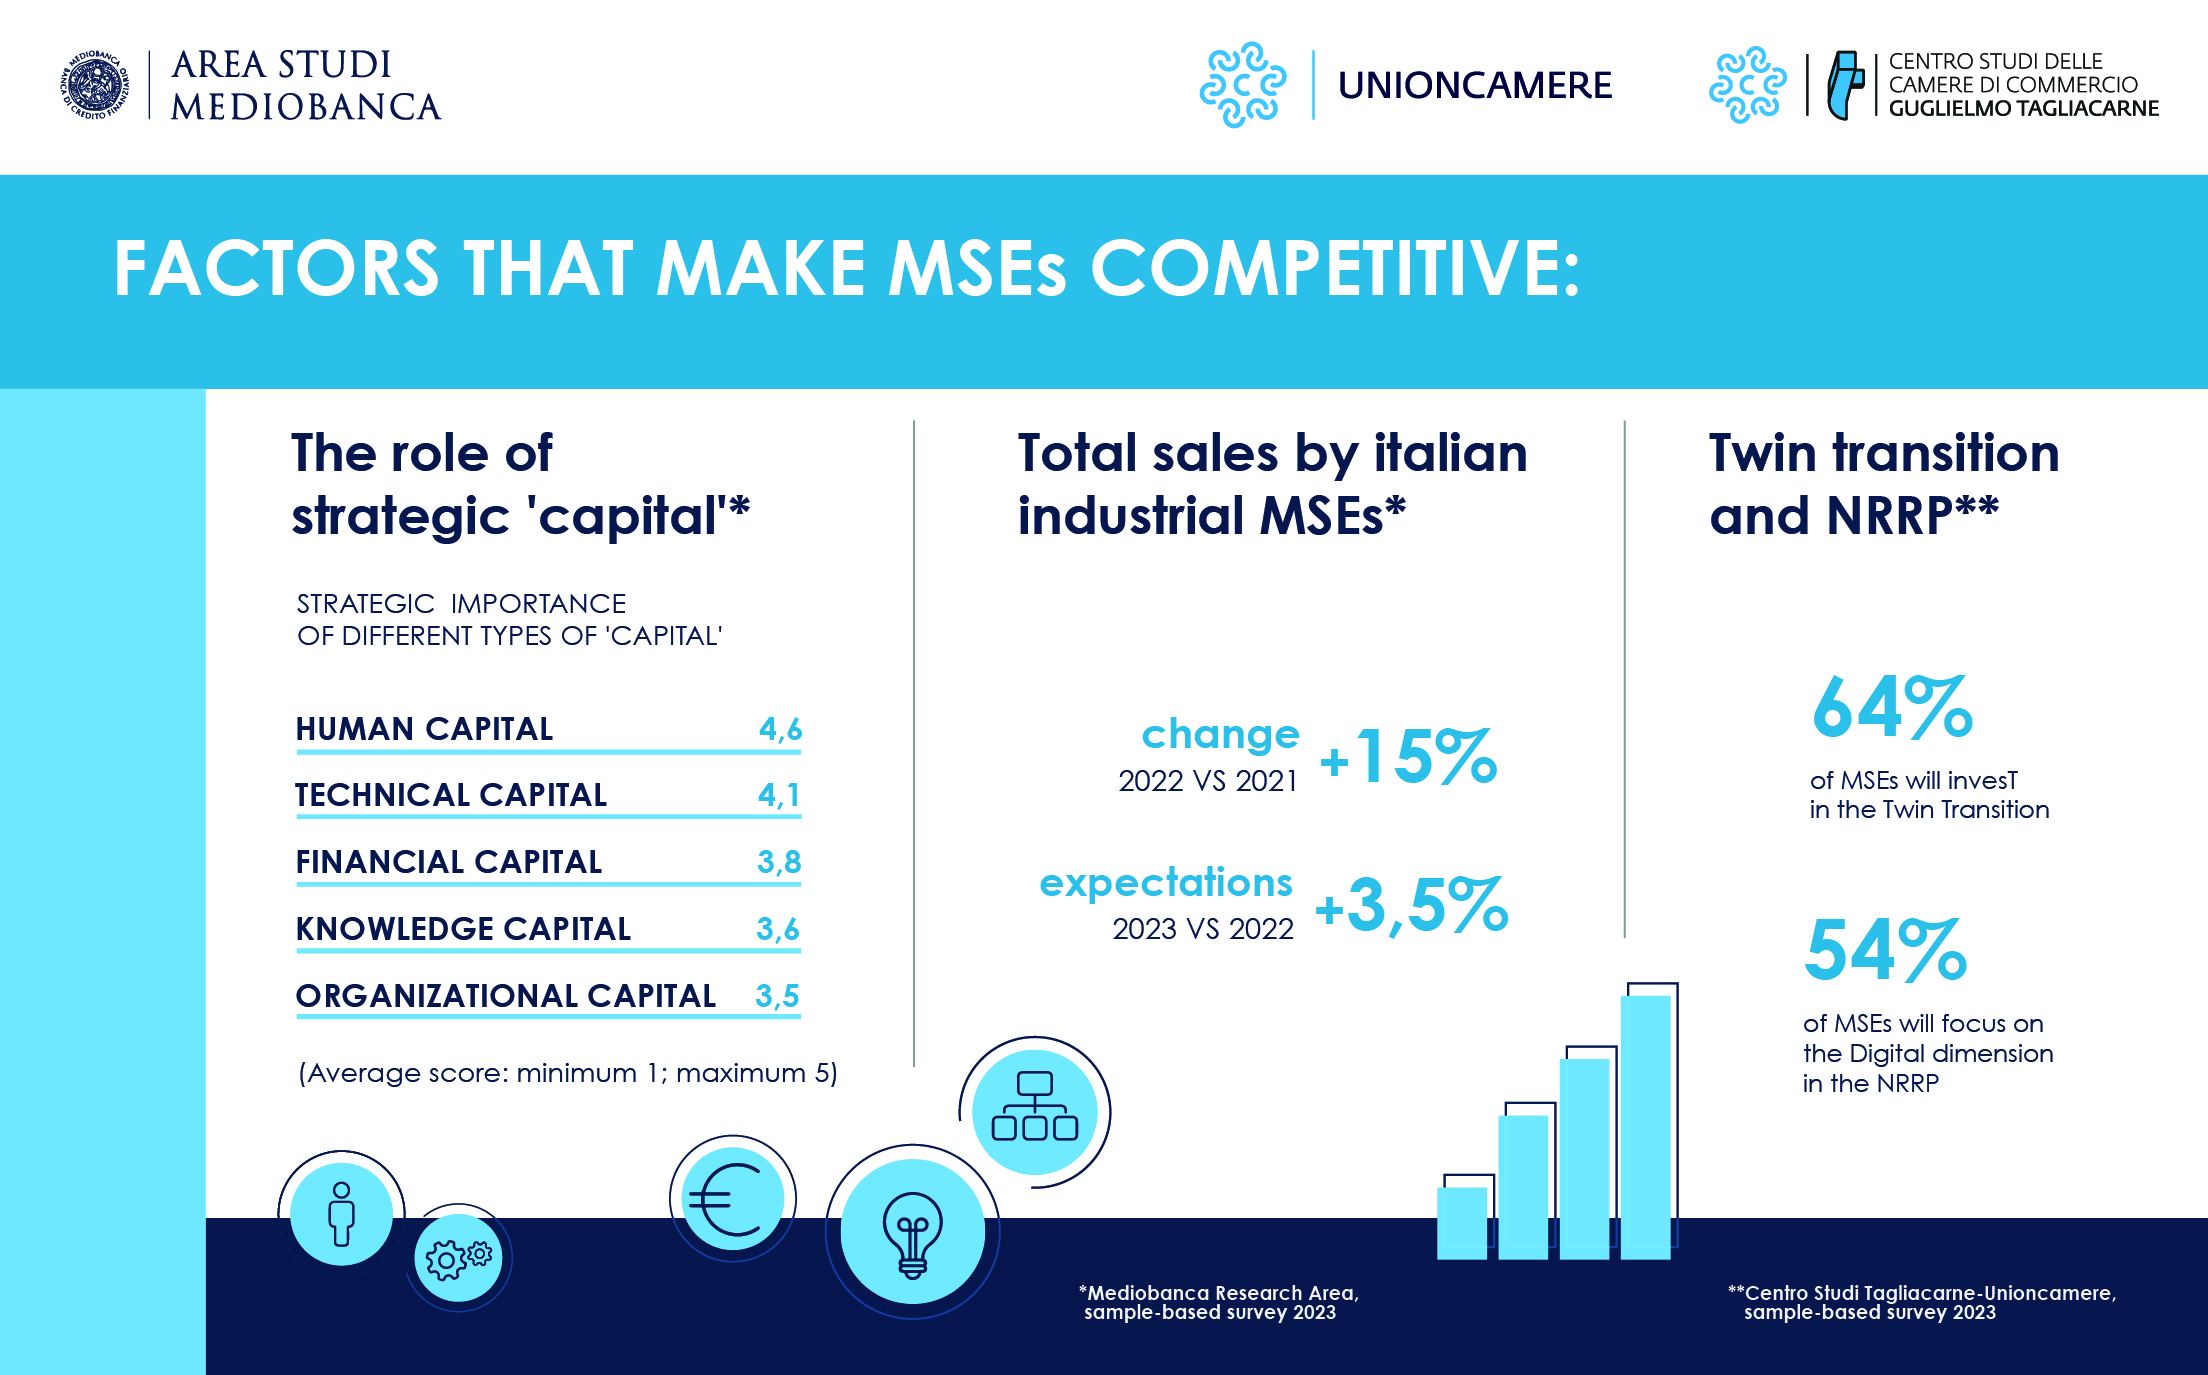 Image for Italian MSEs: human capital the ‘key factor’ for competitiveness